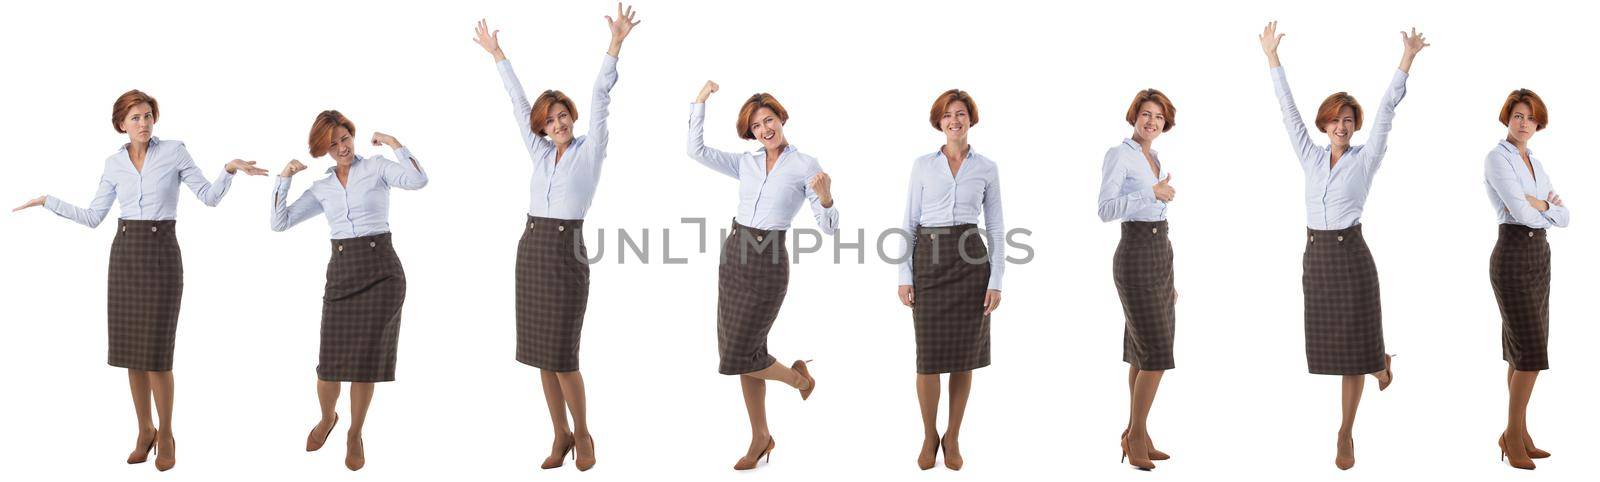 Set of young business woman full length portraits doing different gestures isolated on white background